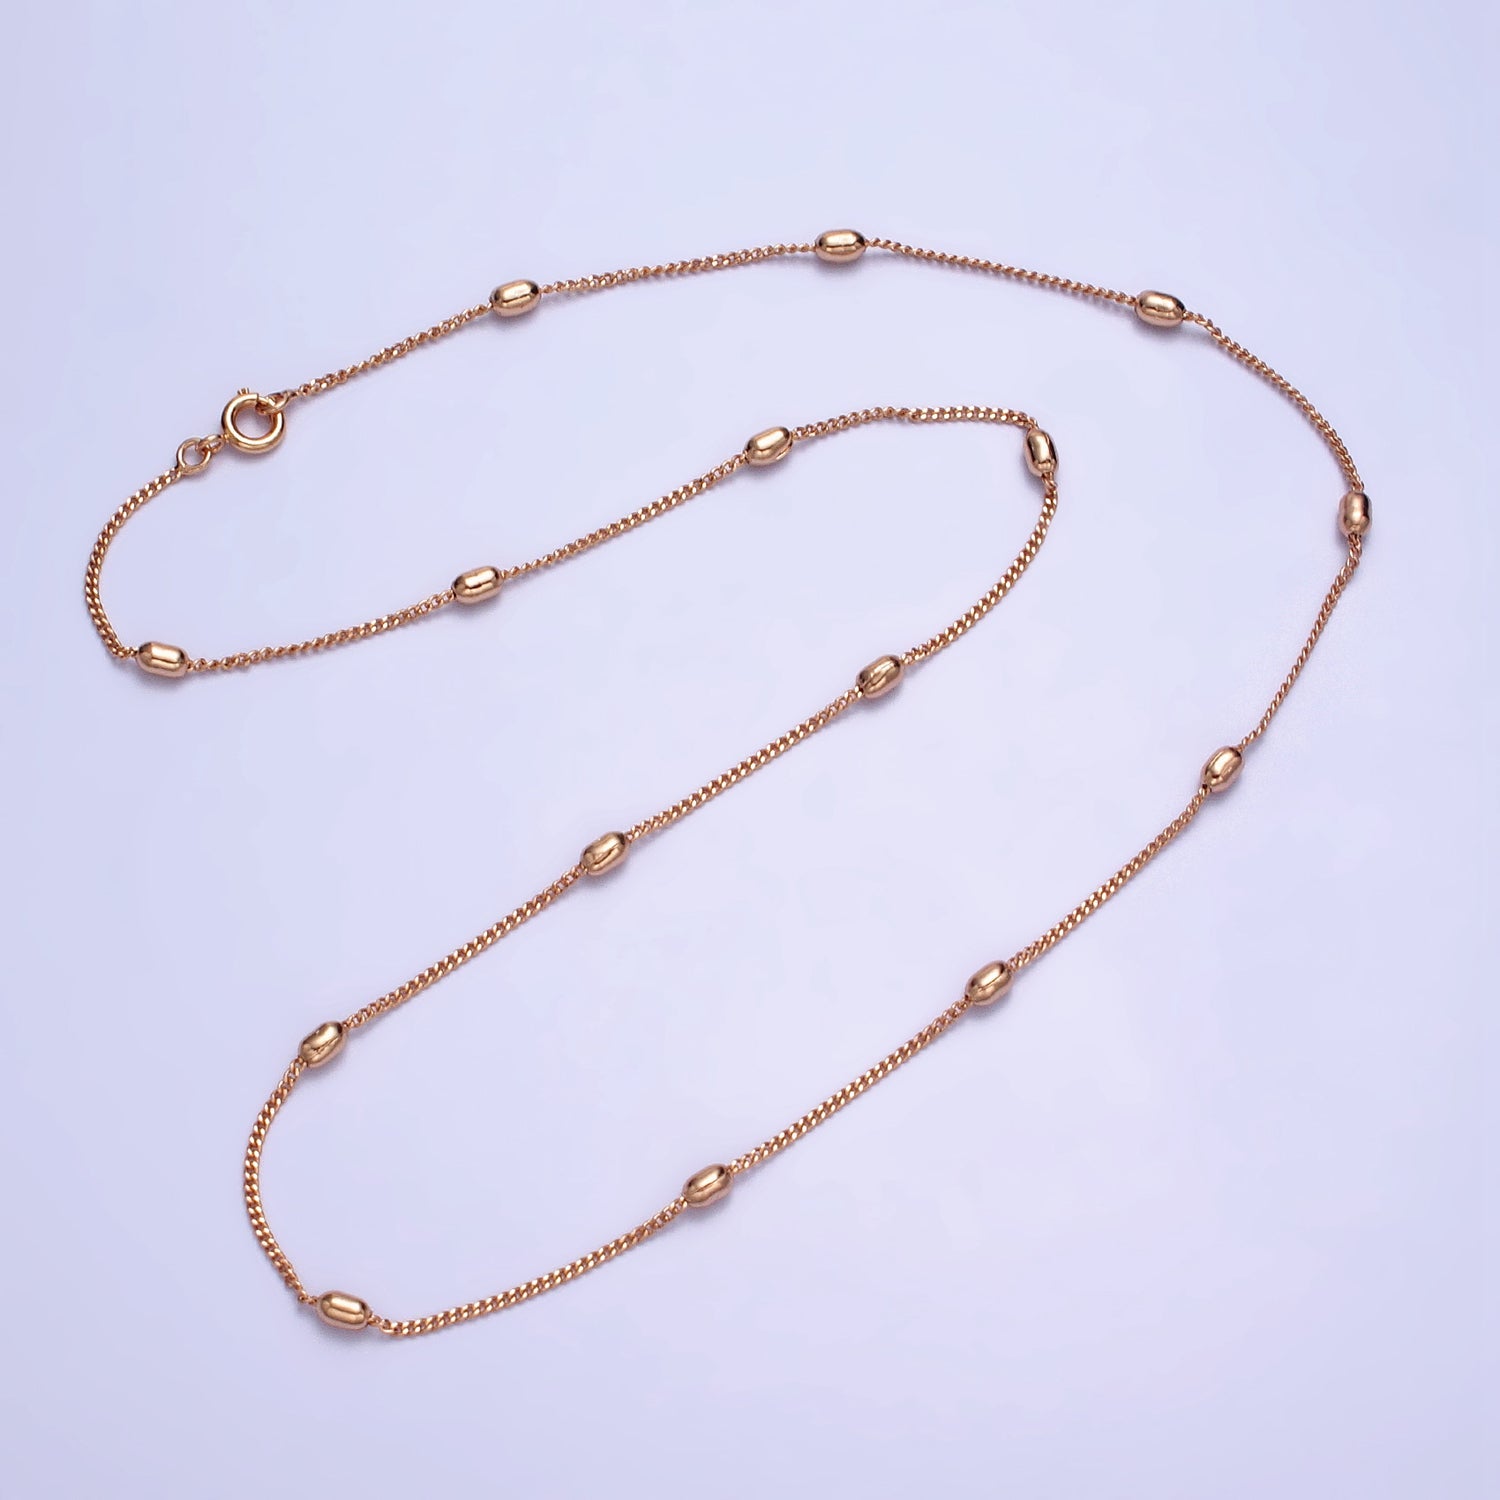 19.75 Inch Satellite Chain 18K Gold Filled Dainty Beaded Chain Necklace WA-1602 - DLUXCA